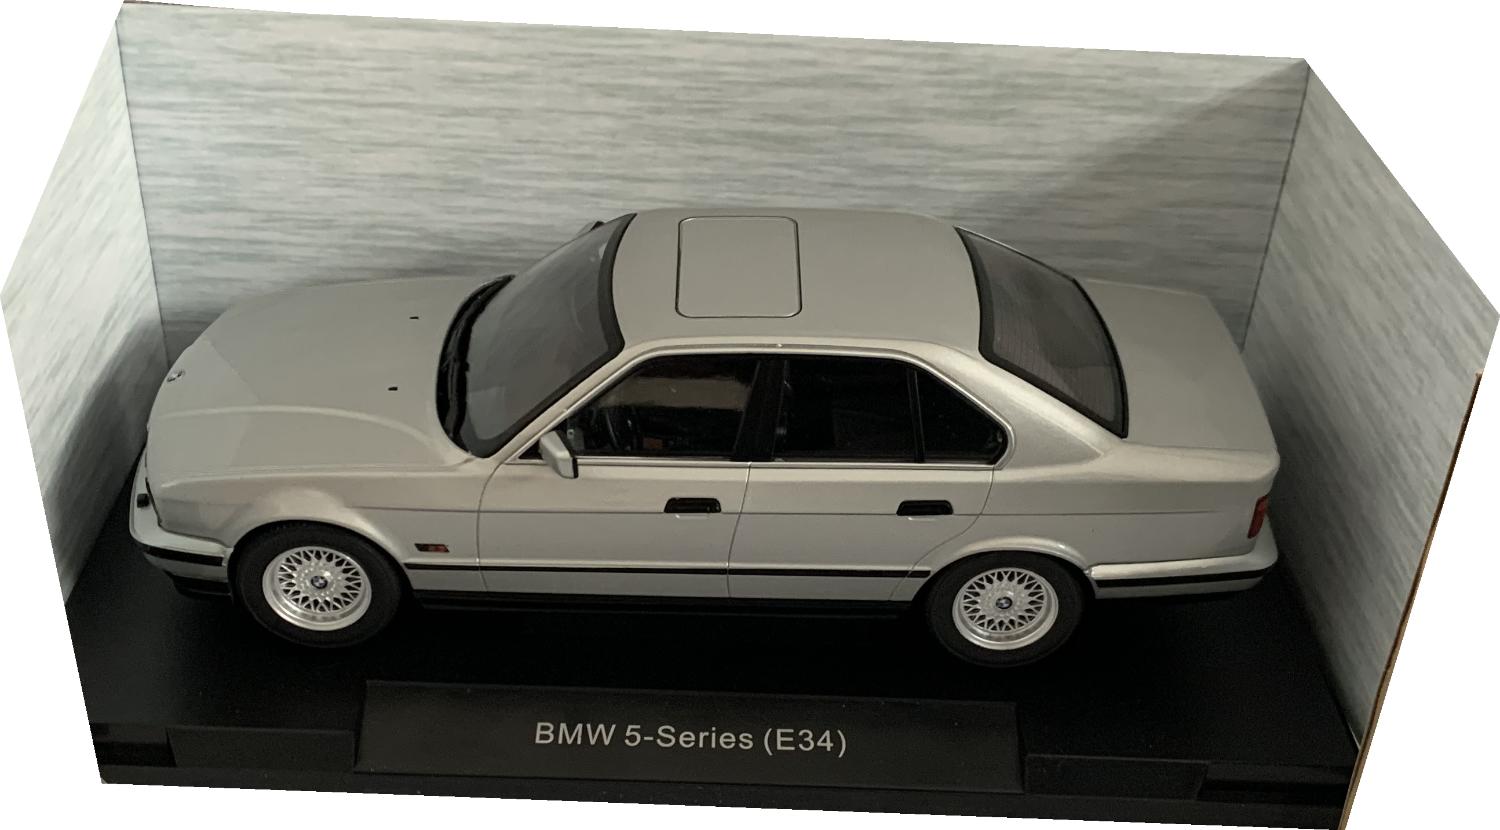 BMW 5 Series (E34) 1982 in silver 1:18 scale model from Model Car Group